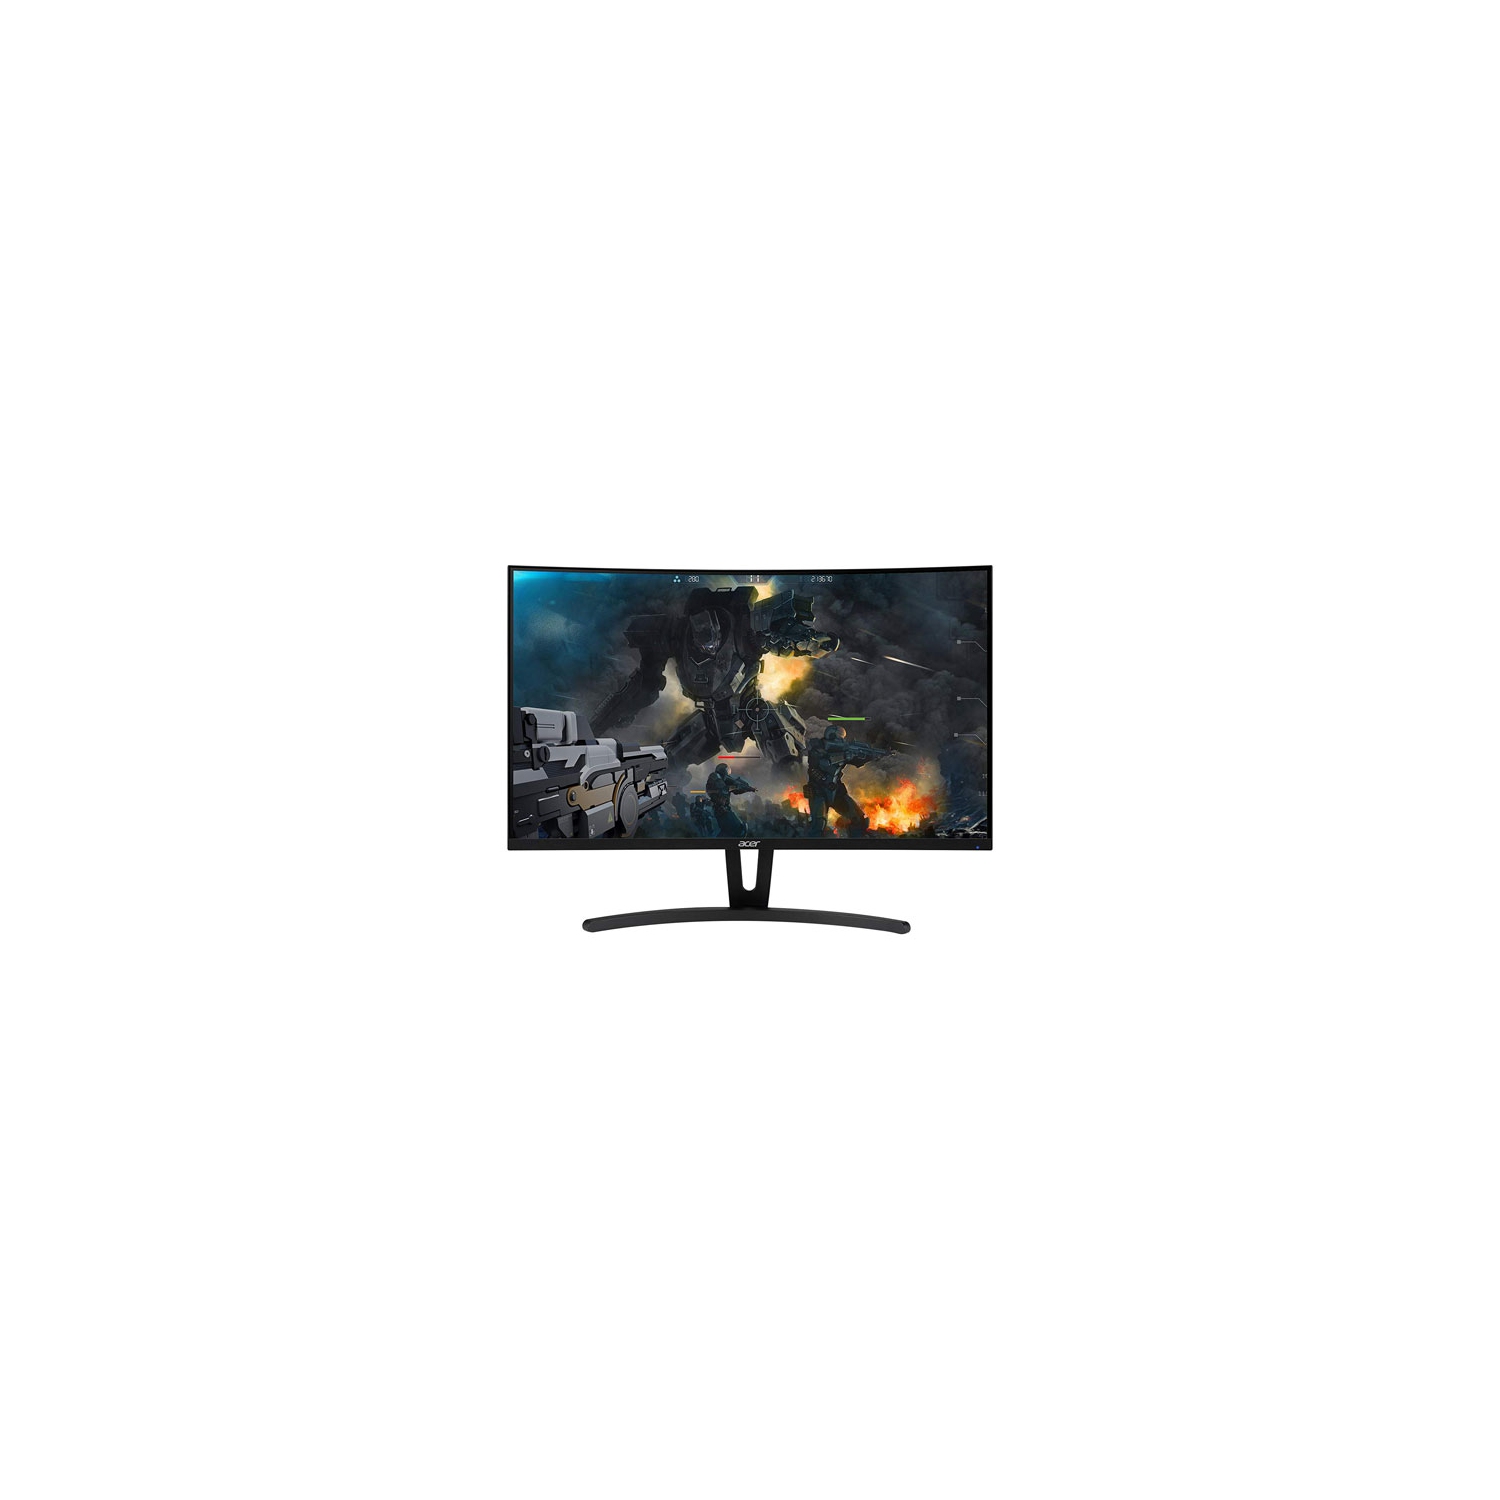 Refurbished (Good) - Acer 27" FHD 144Hz 4ms GTG Curved LED FreeSync Gaming Monitor (ED273 Abidpx)